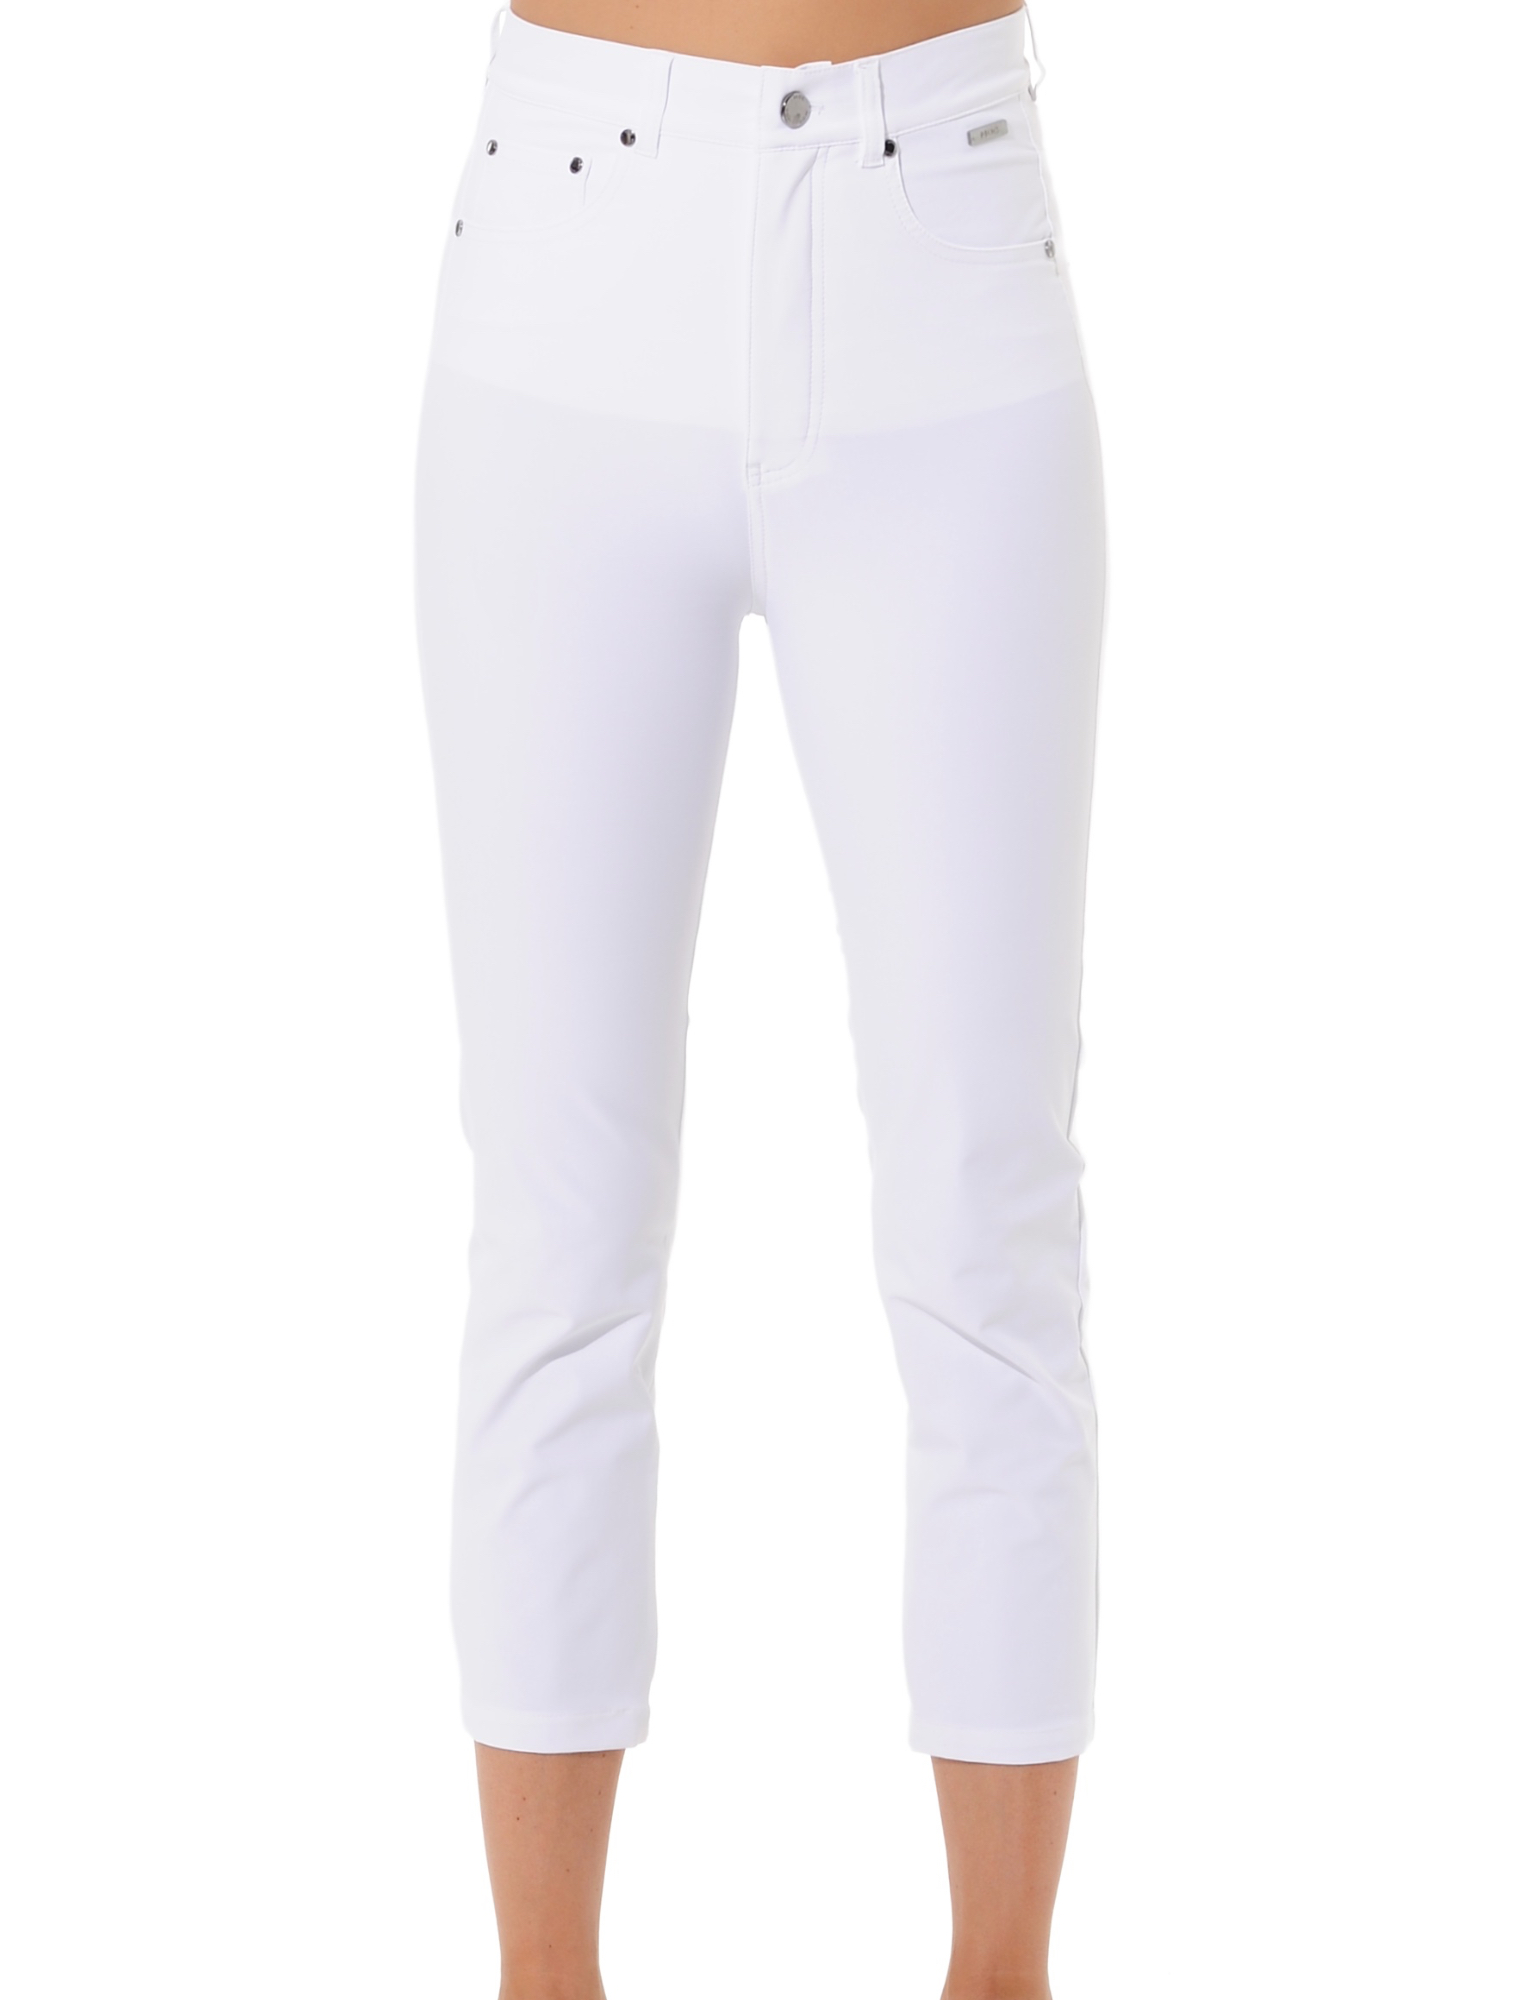 4way stretch high waist cropped pants white 